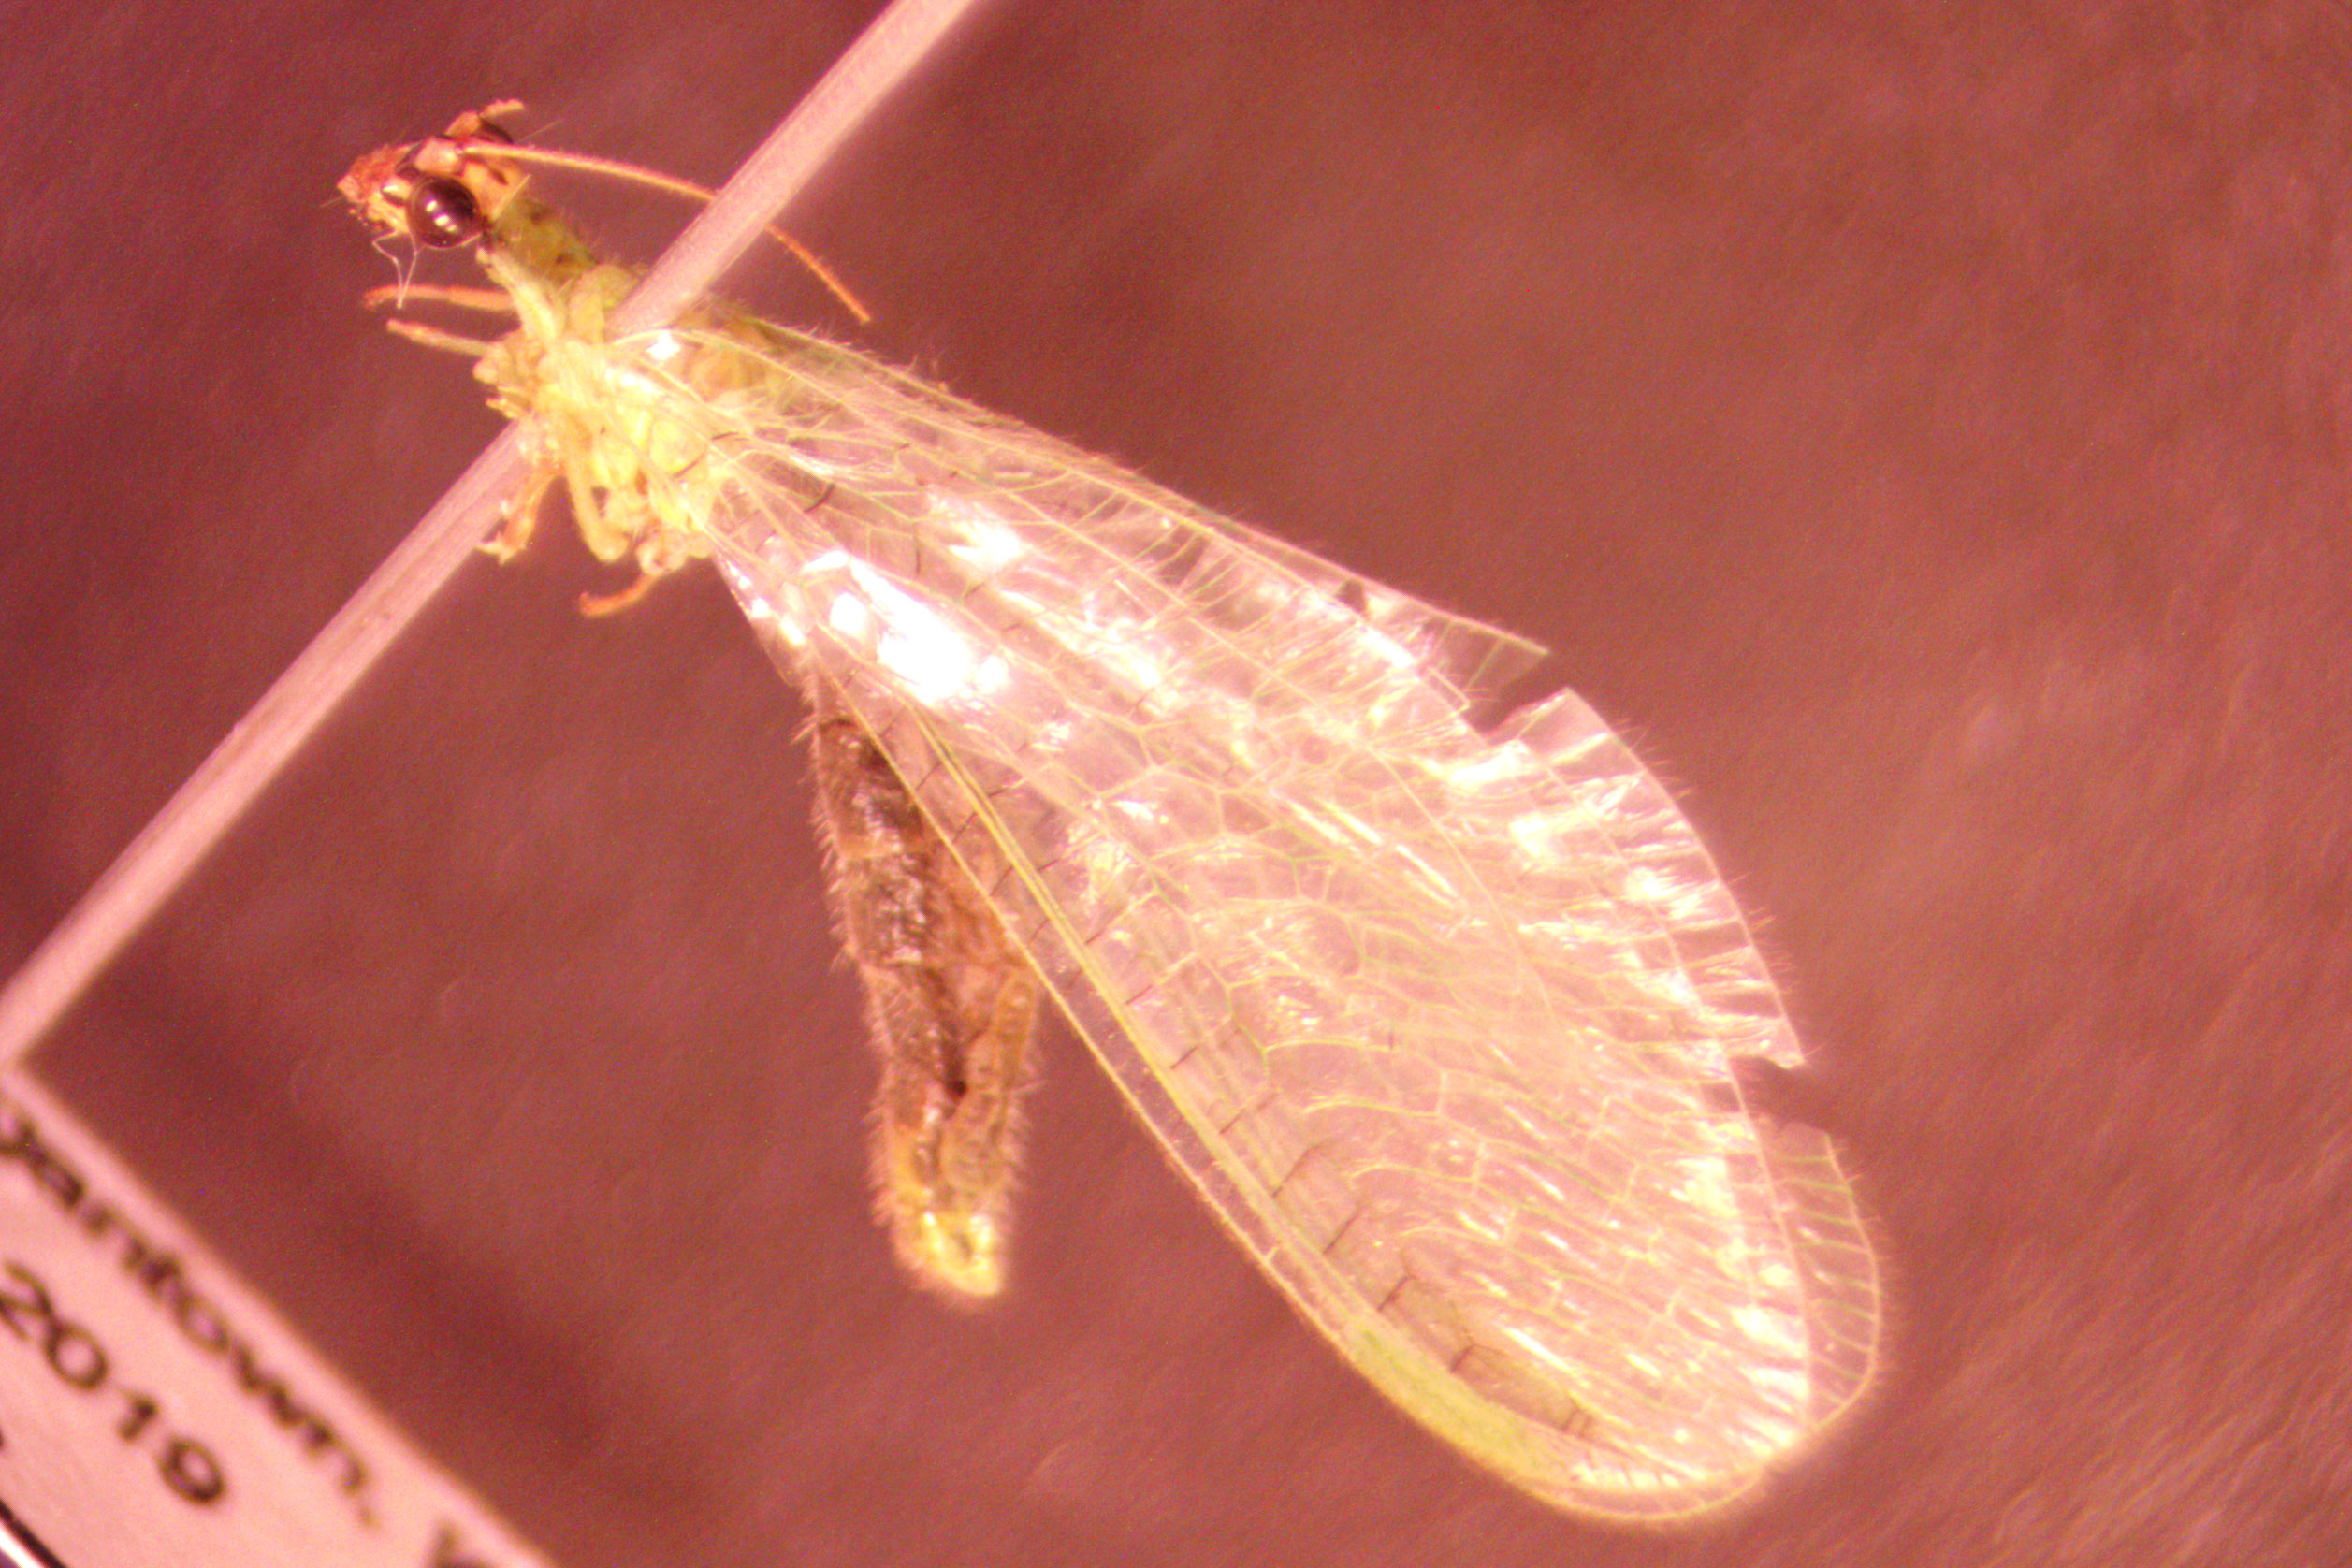 Green Lacewing - North American Insects & Spiders